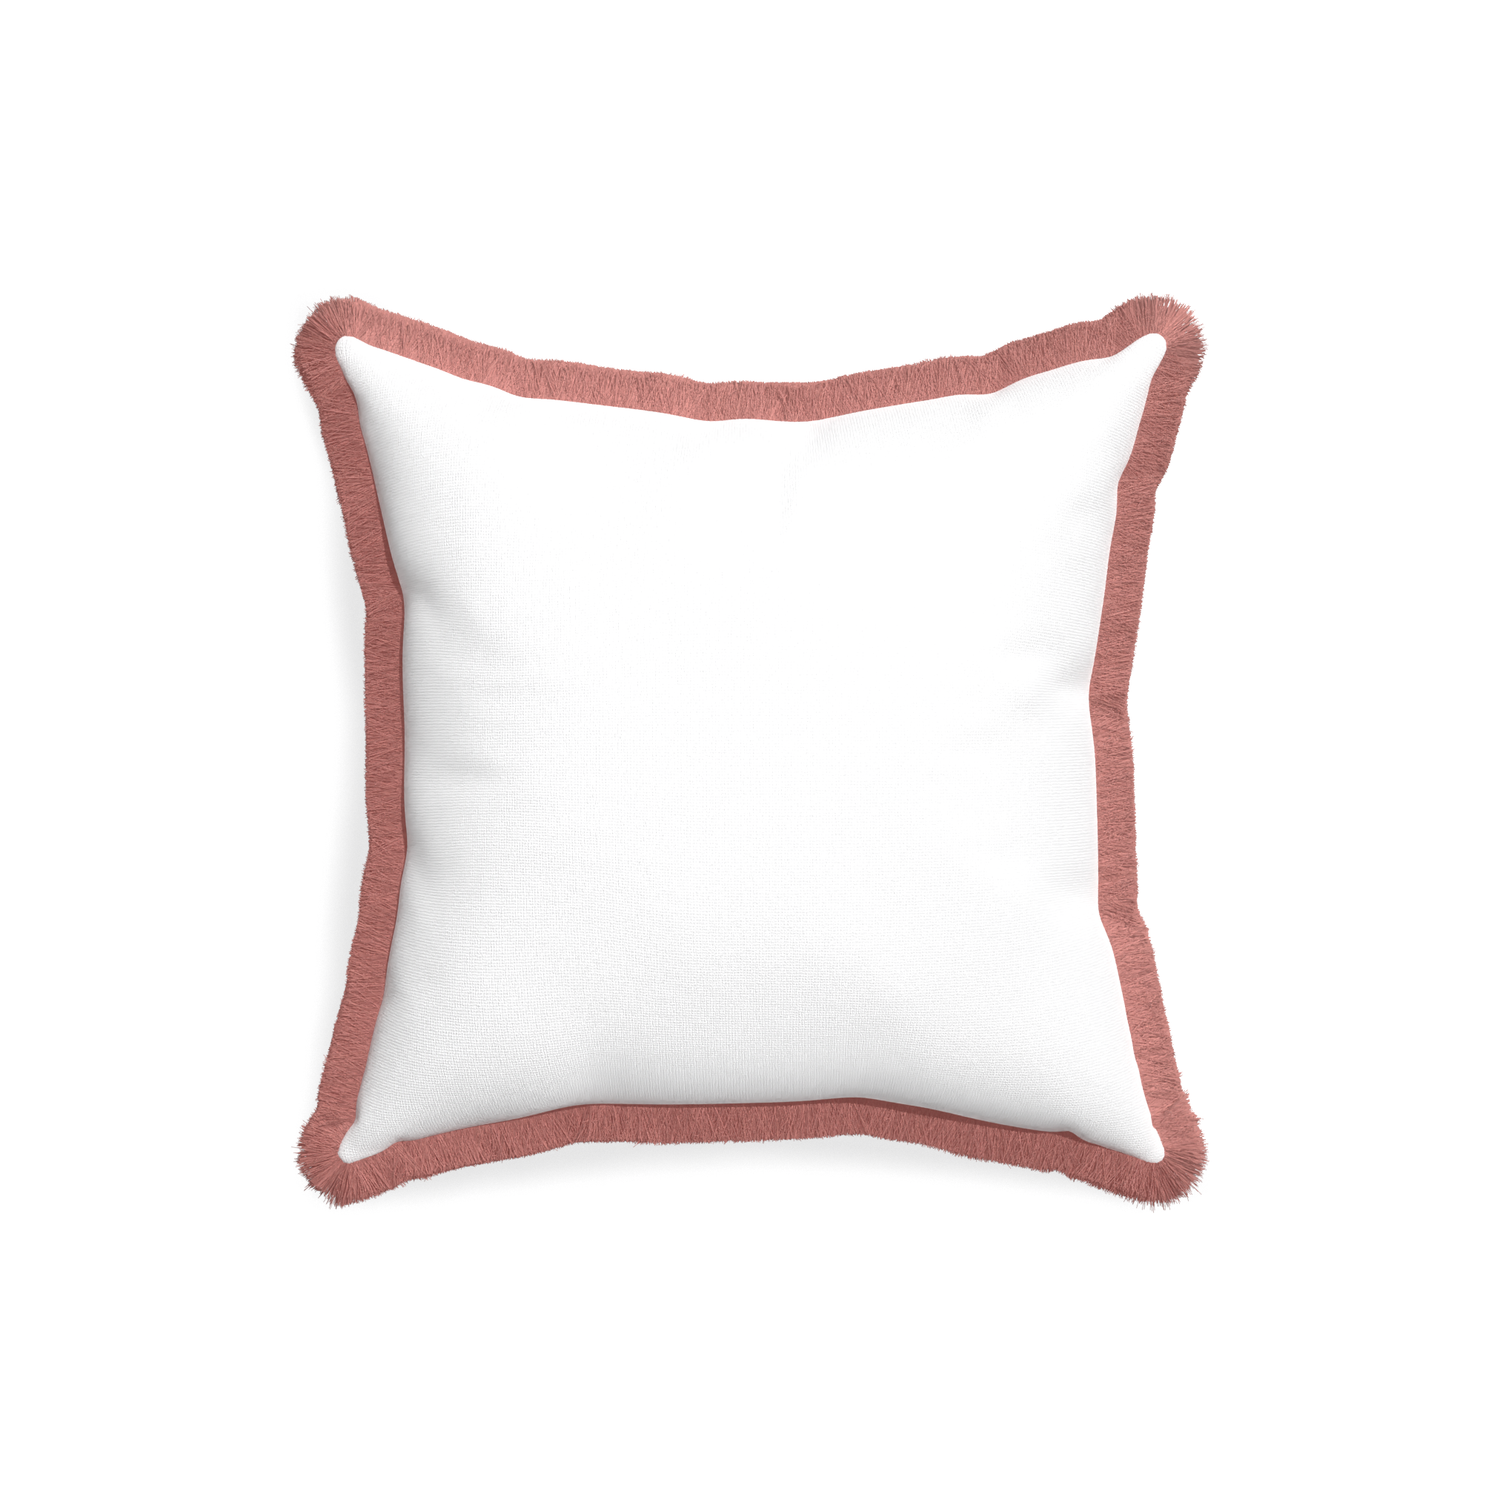 18-square snow custom white cottonpillow with d fringe on white background